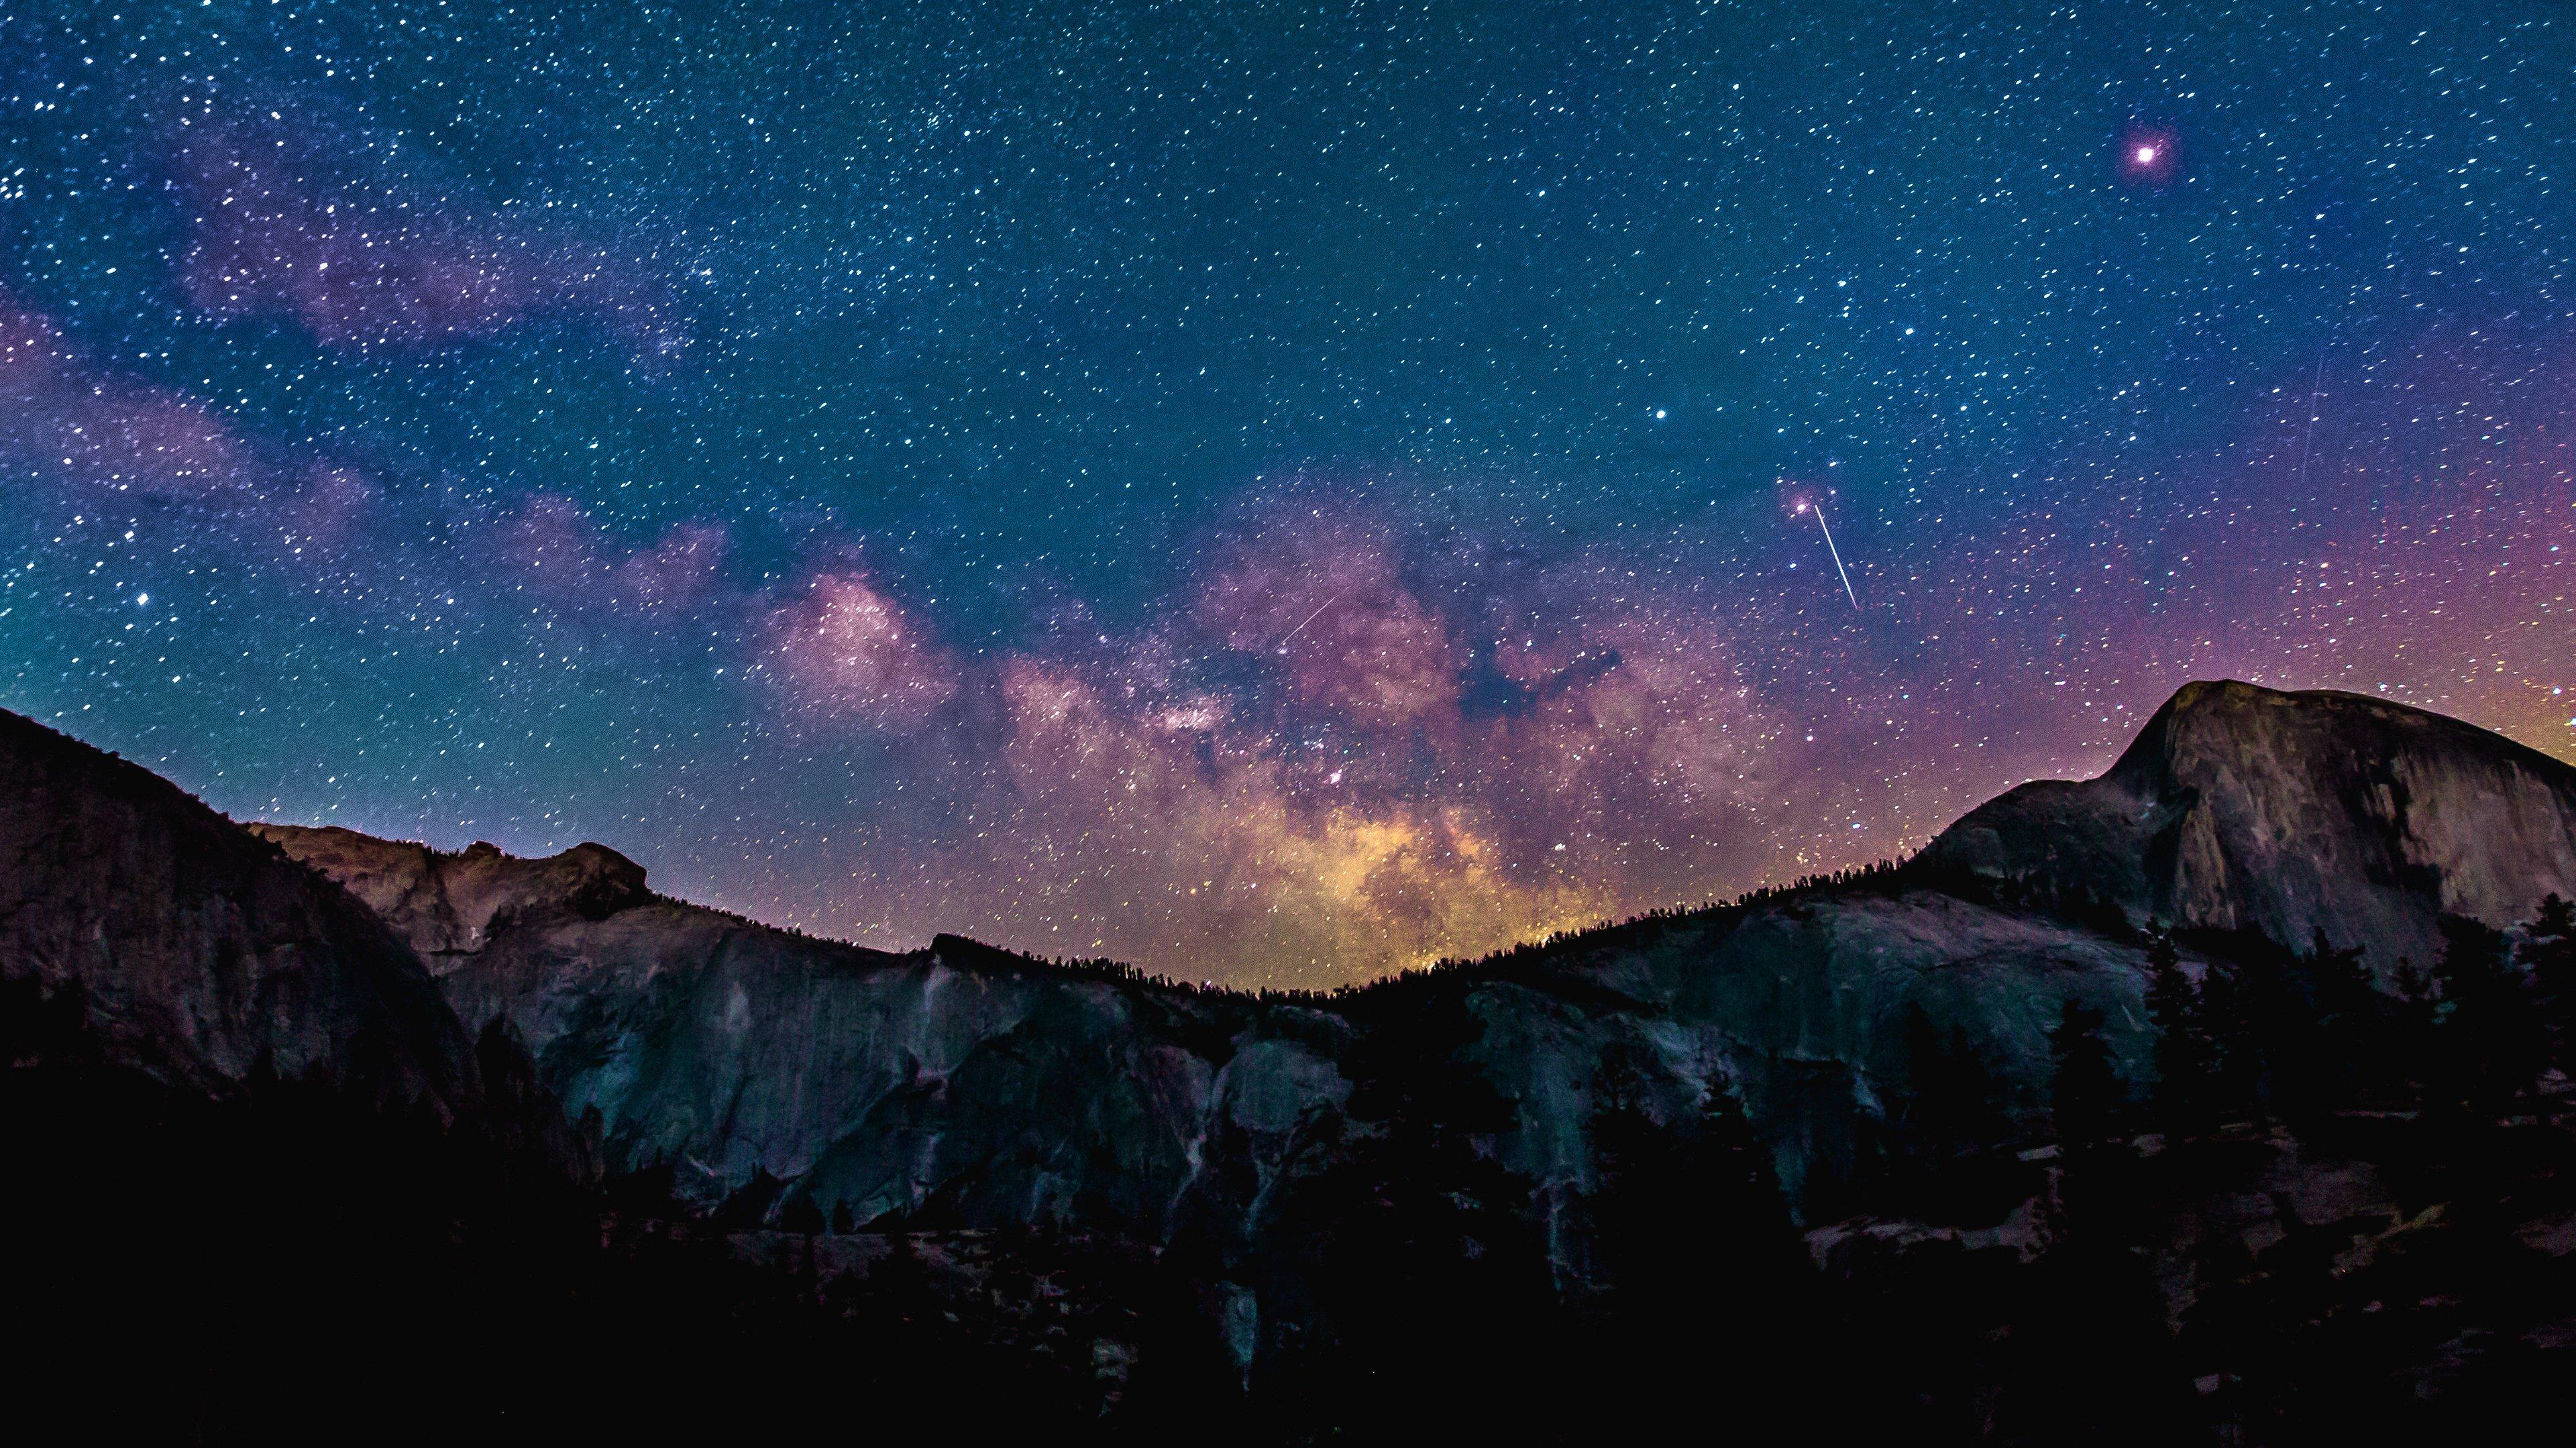 Milky Way Over Mountains Wallpaper   iPhone Android Desktop